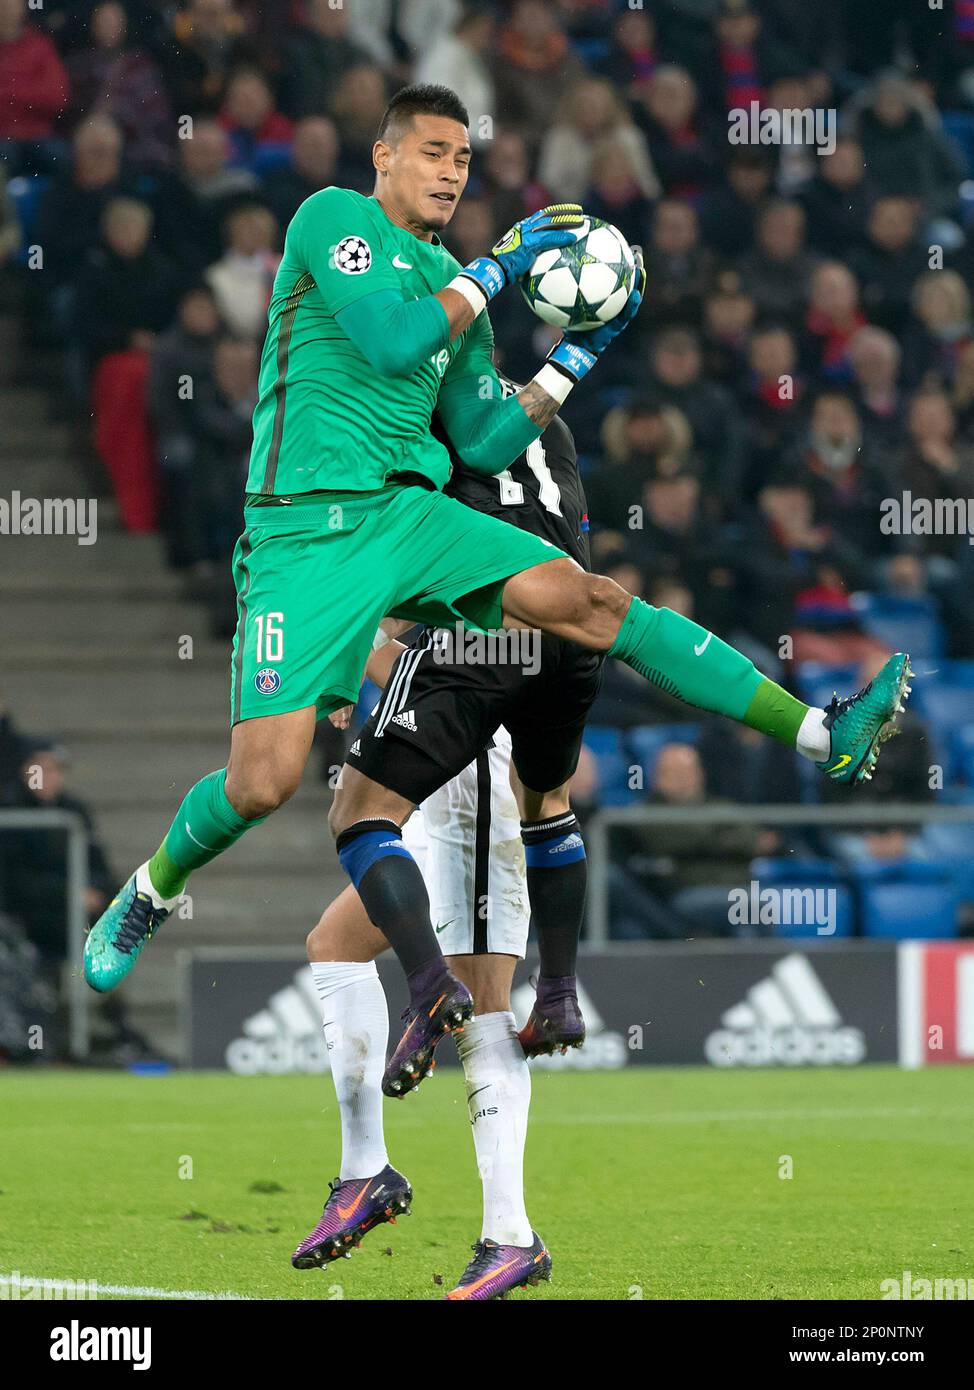 Paris Saint-Germain's goalkeeper Alphonse Areola in action during the  Champions League group A soccer match between FC Basel and Paris Saint- Germain at the St. Jakob-Park stadium in Basel, Switzerland, Tuesday Nov. 1,